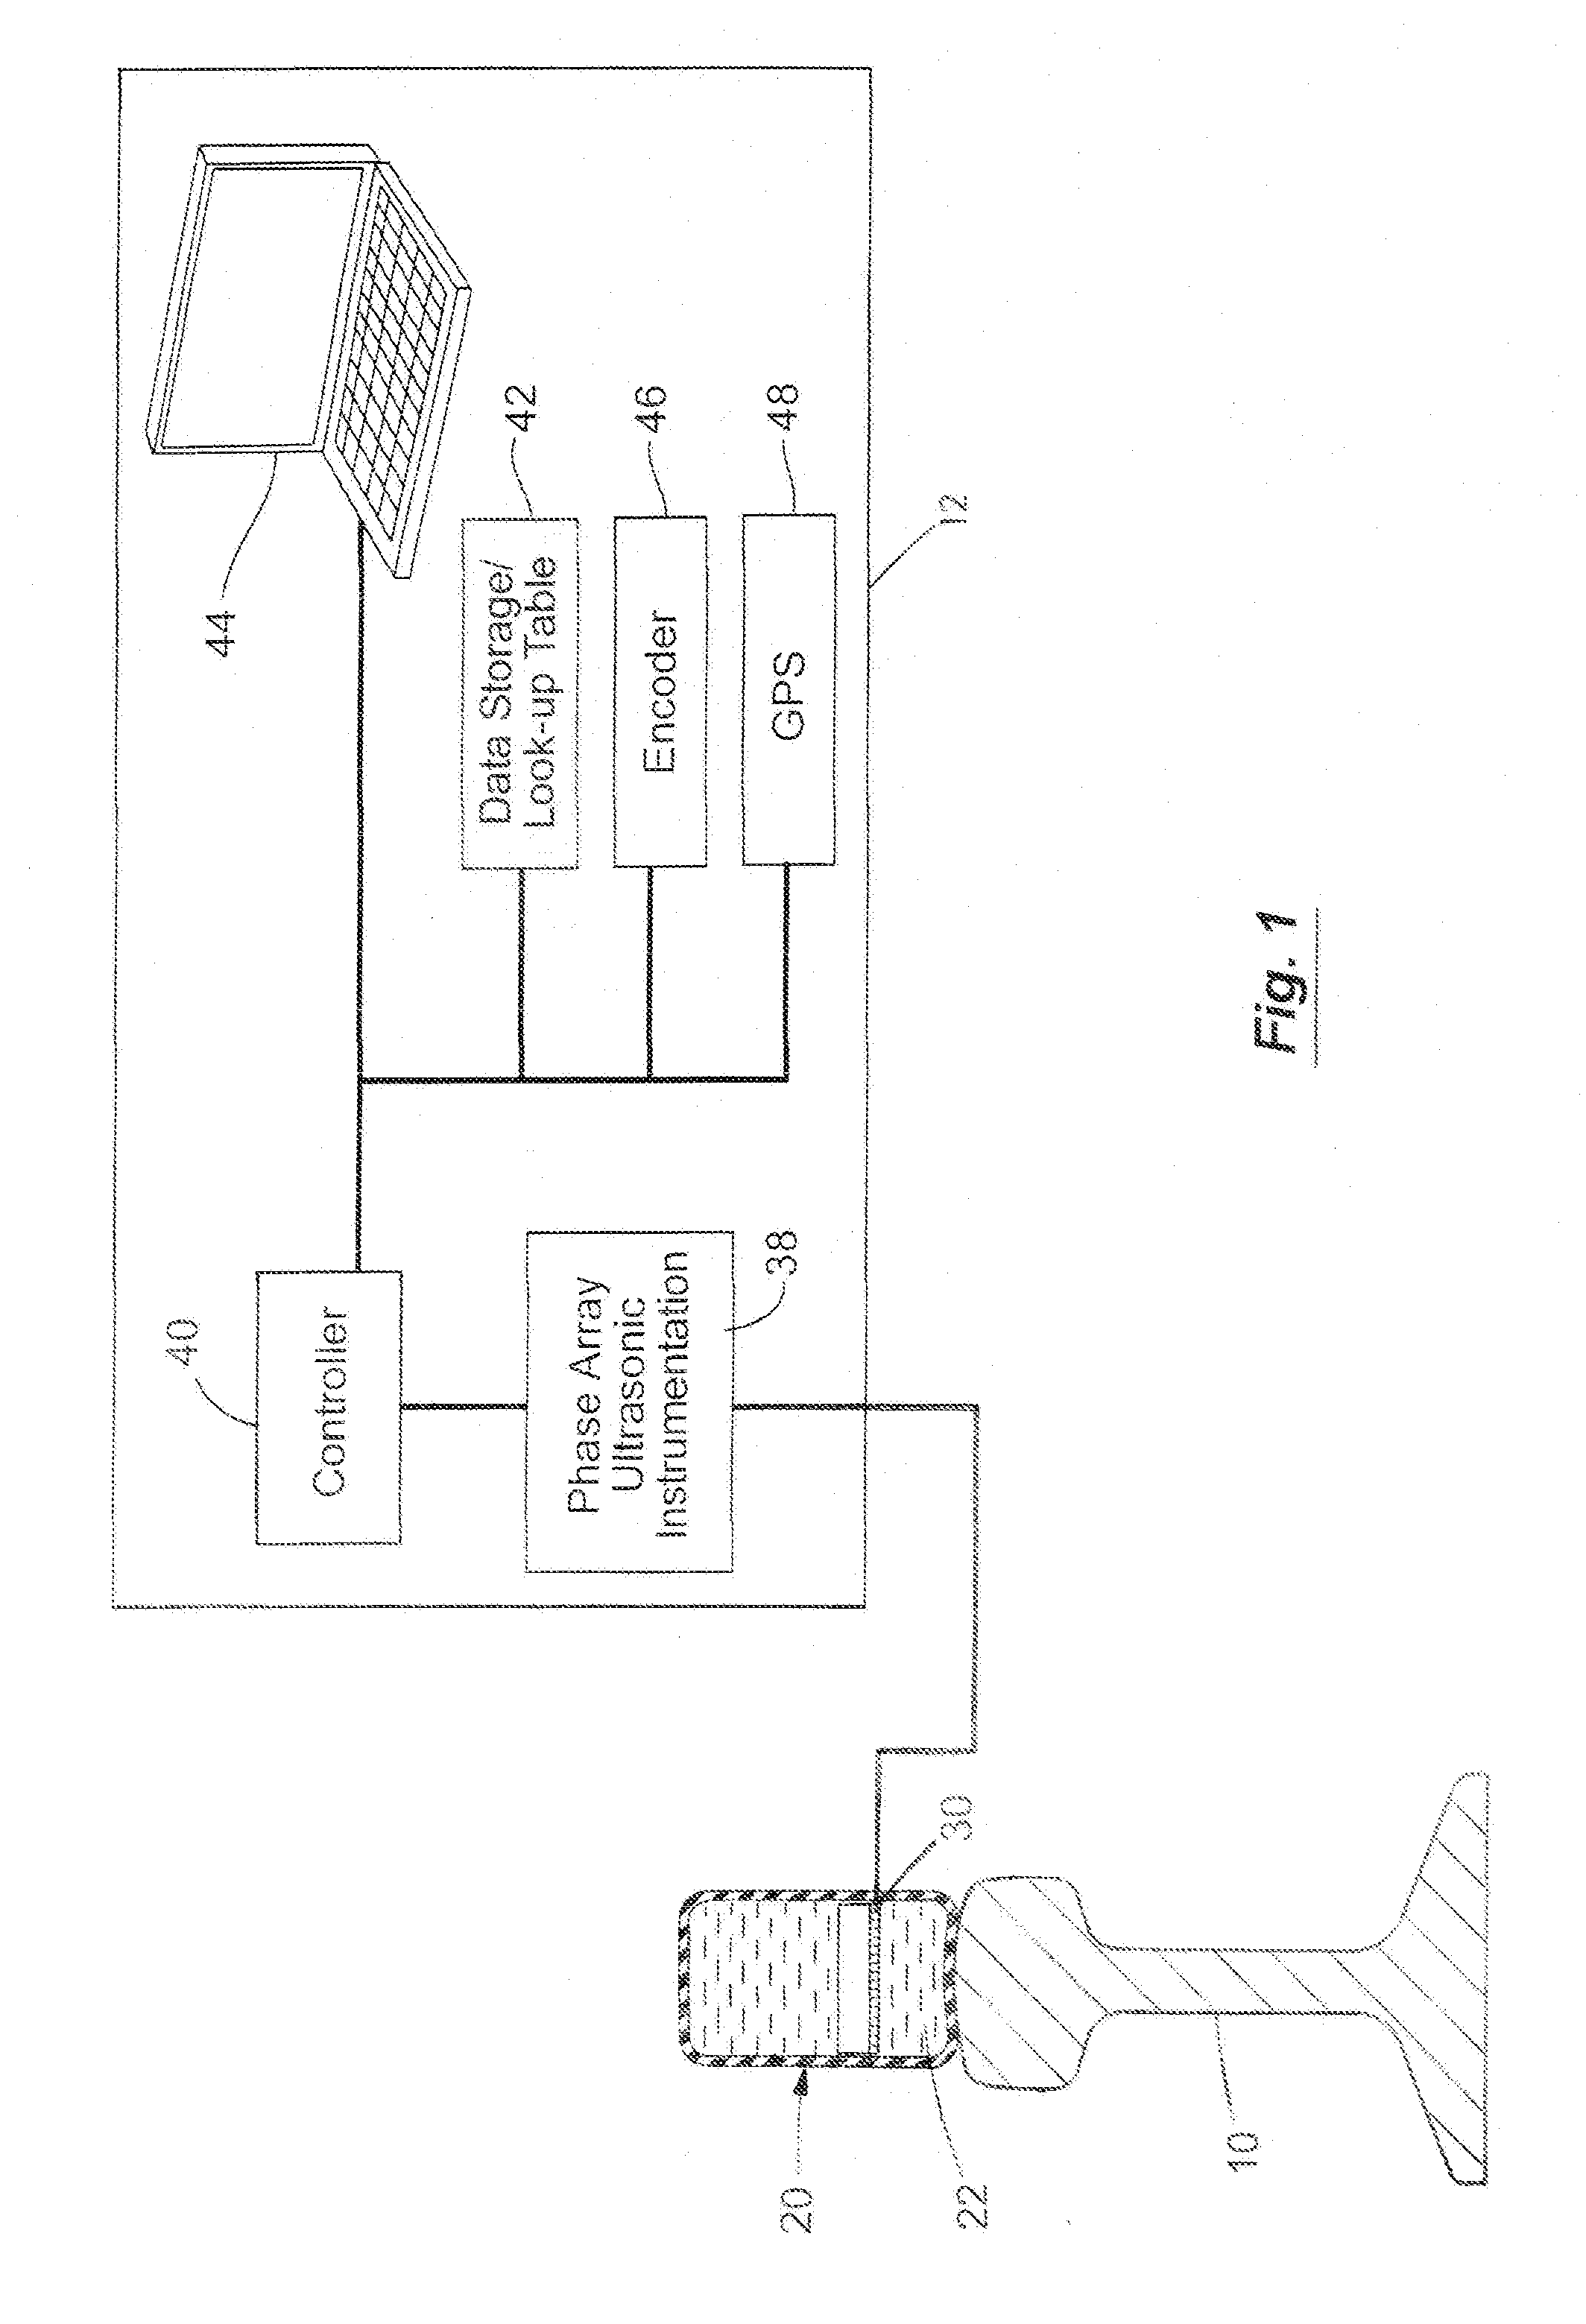 System for inspecting rail with phased array ultrasonics